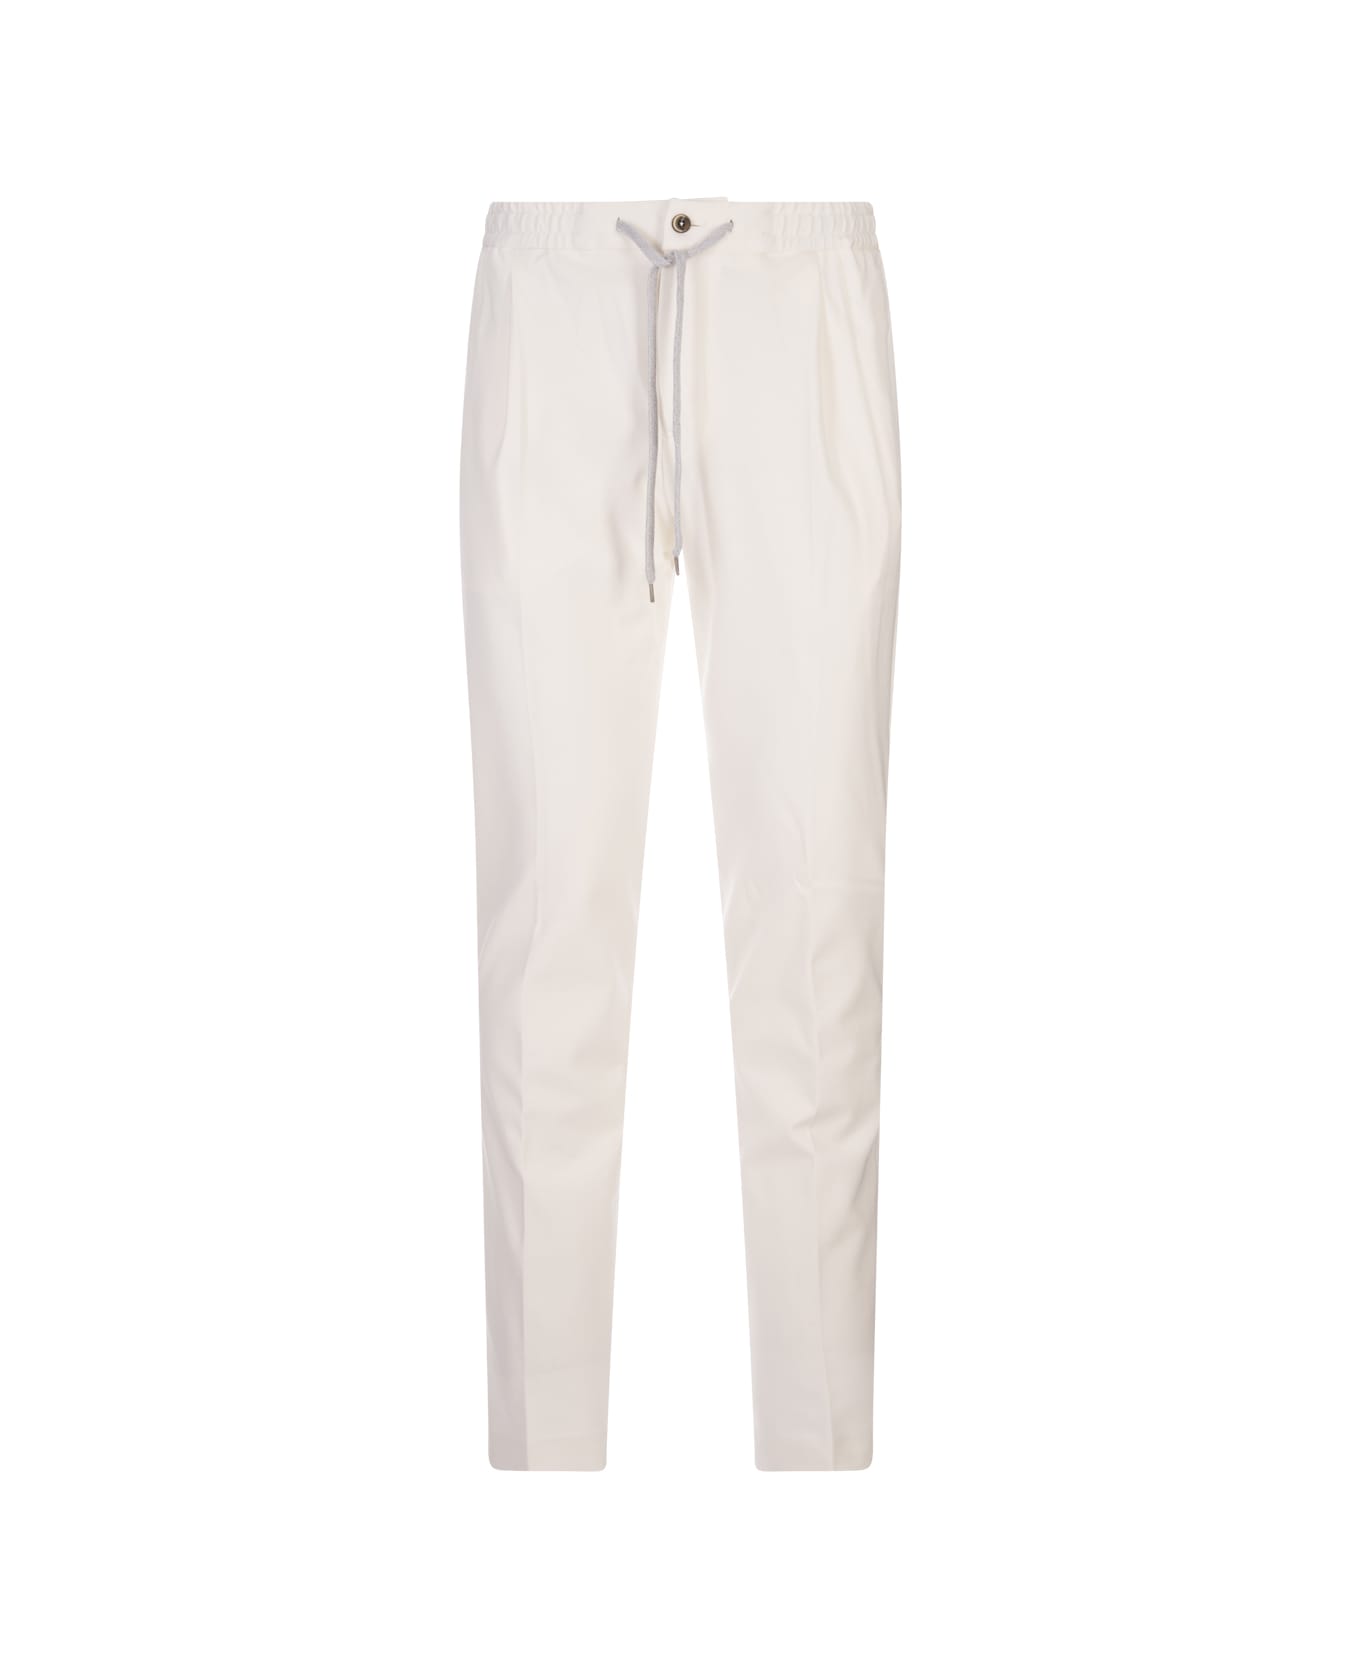 PT01 White Soft Fit Trousers - White